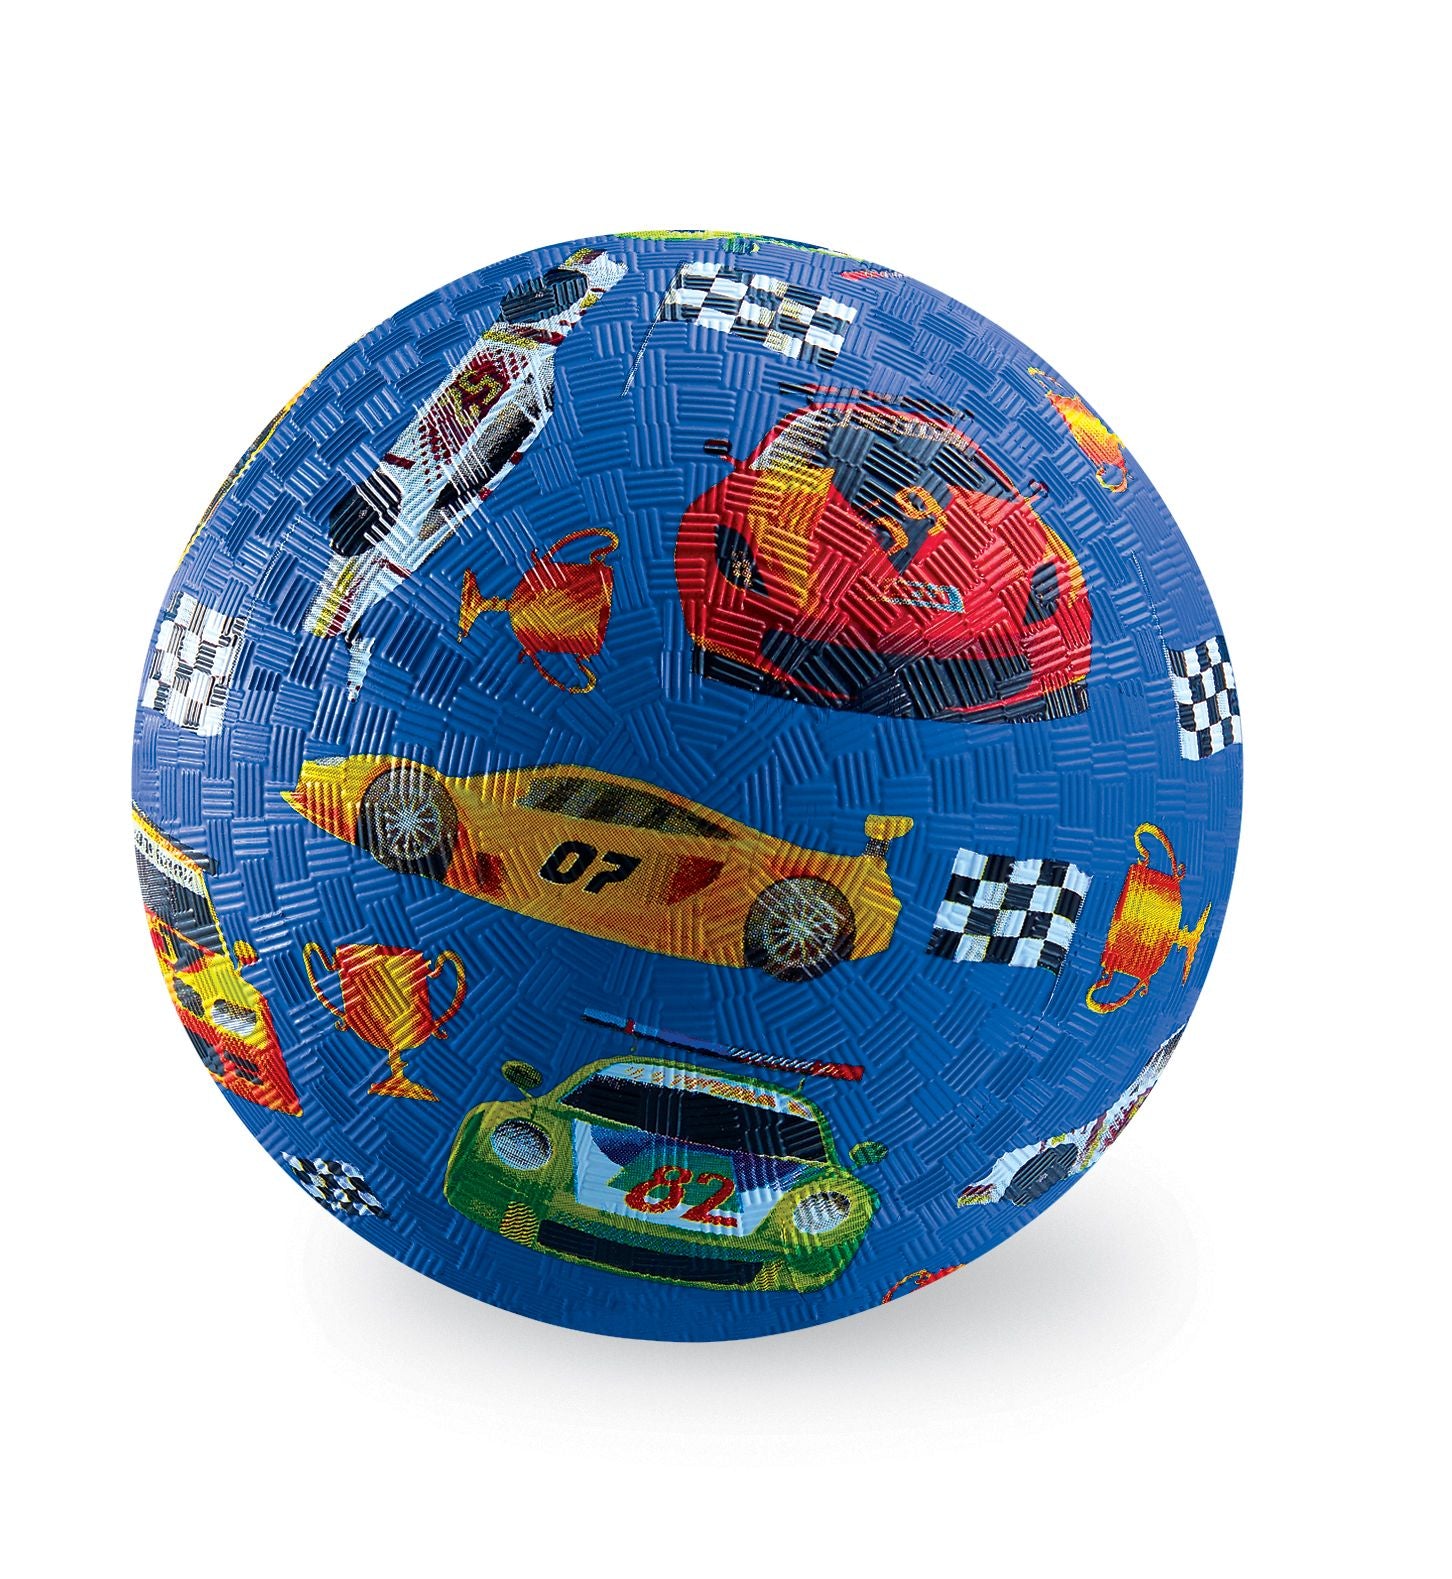 5" Playground Ball - At the Races